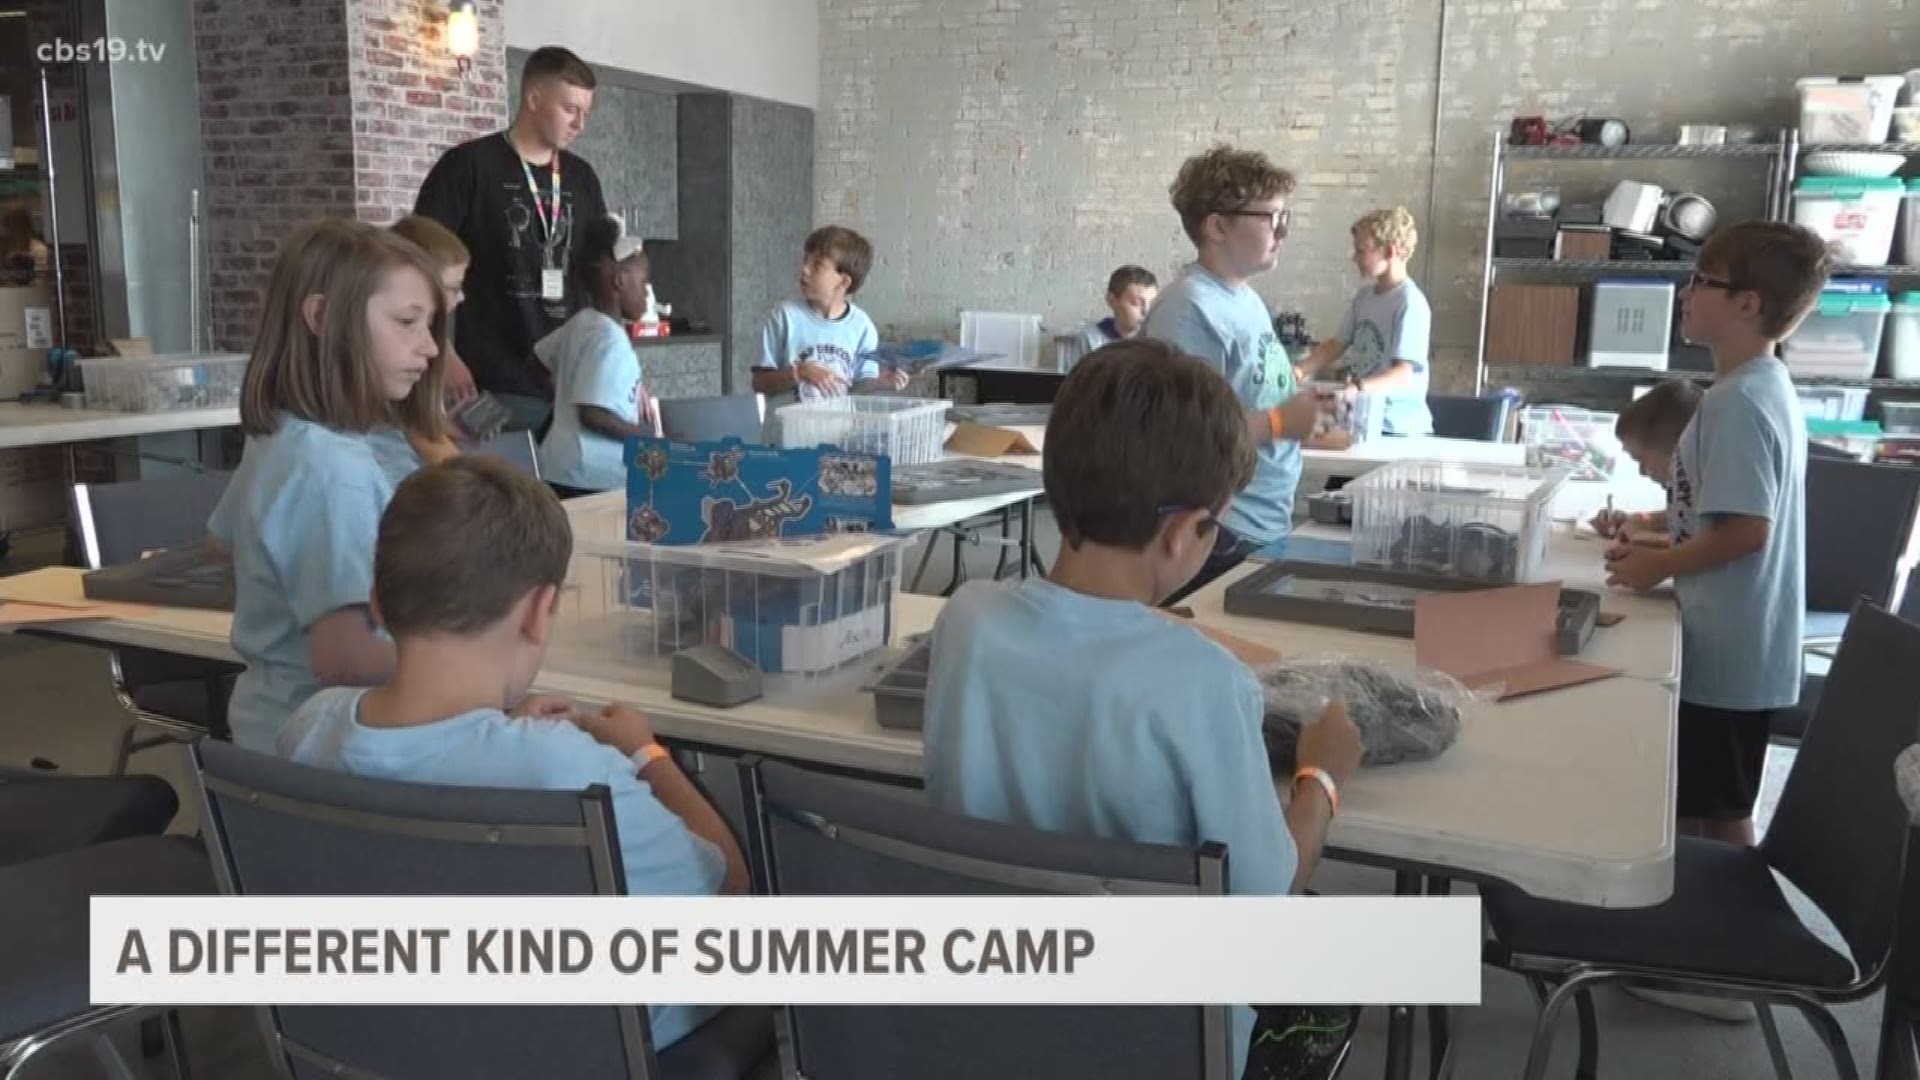 For as low as $175 per week, the Discovery Science Place is offering 8 weeks of summer camps covering a range of science topics.